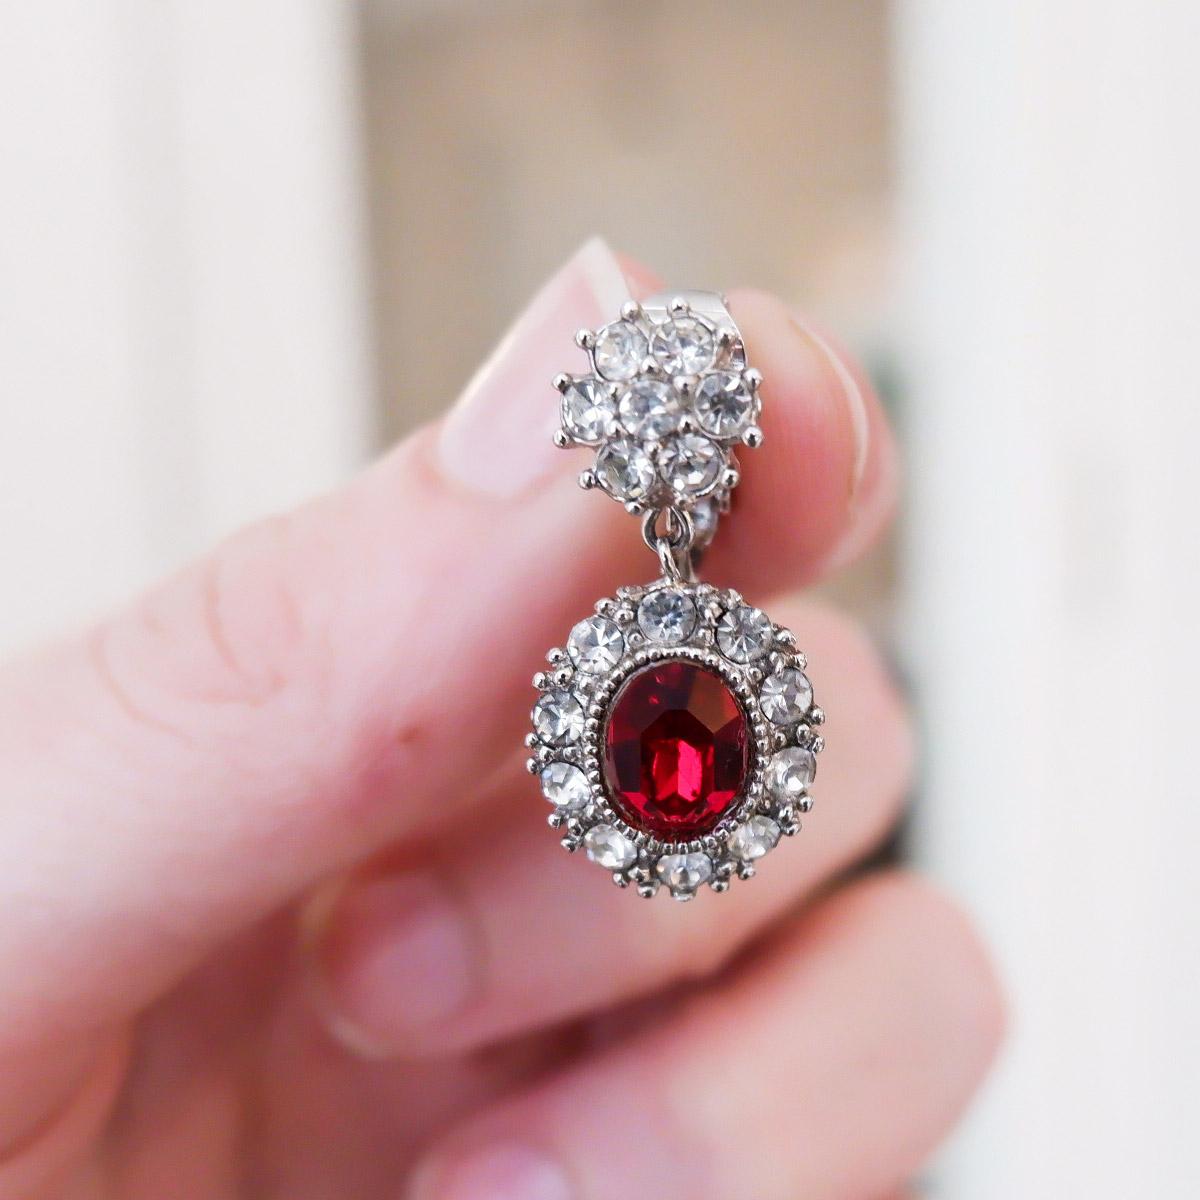 ALL CINER JEWELRY IS MADE TO ORDER. PLEASE ALLOW 10 BUSINESS DAYS FOR OUR ARTISANS TO MAKE YOUR JEWELRY FOR YOU! 
Charmingly sweet, these rhodium plated petite drop earrings have crystal rhinestones that illuminate the ruby drop. 
Materials:
Genuine